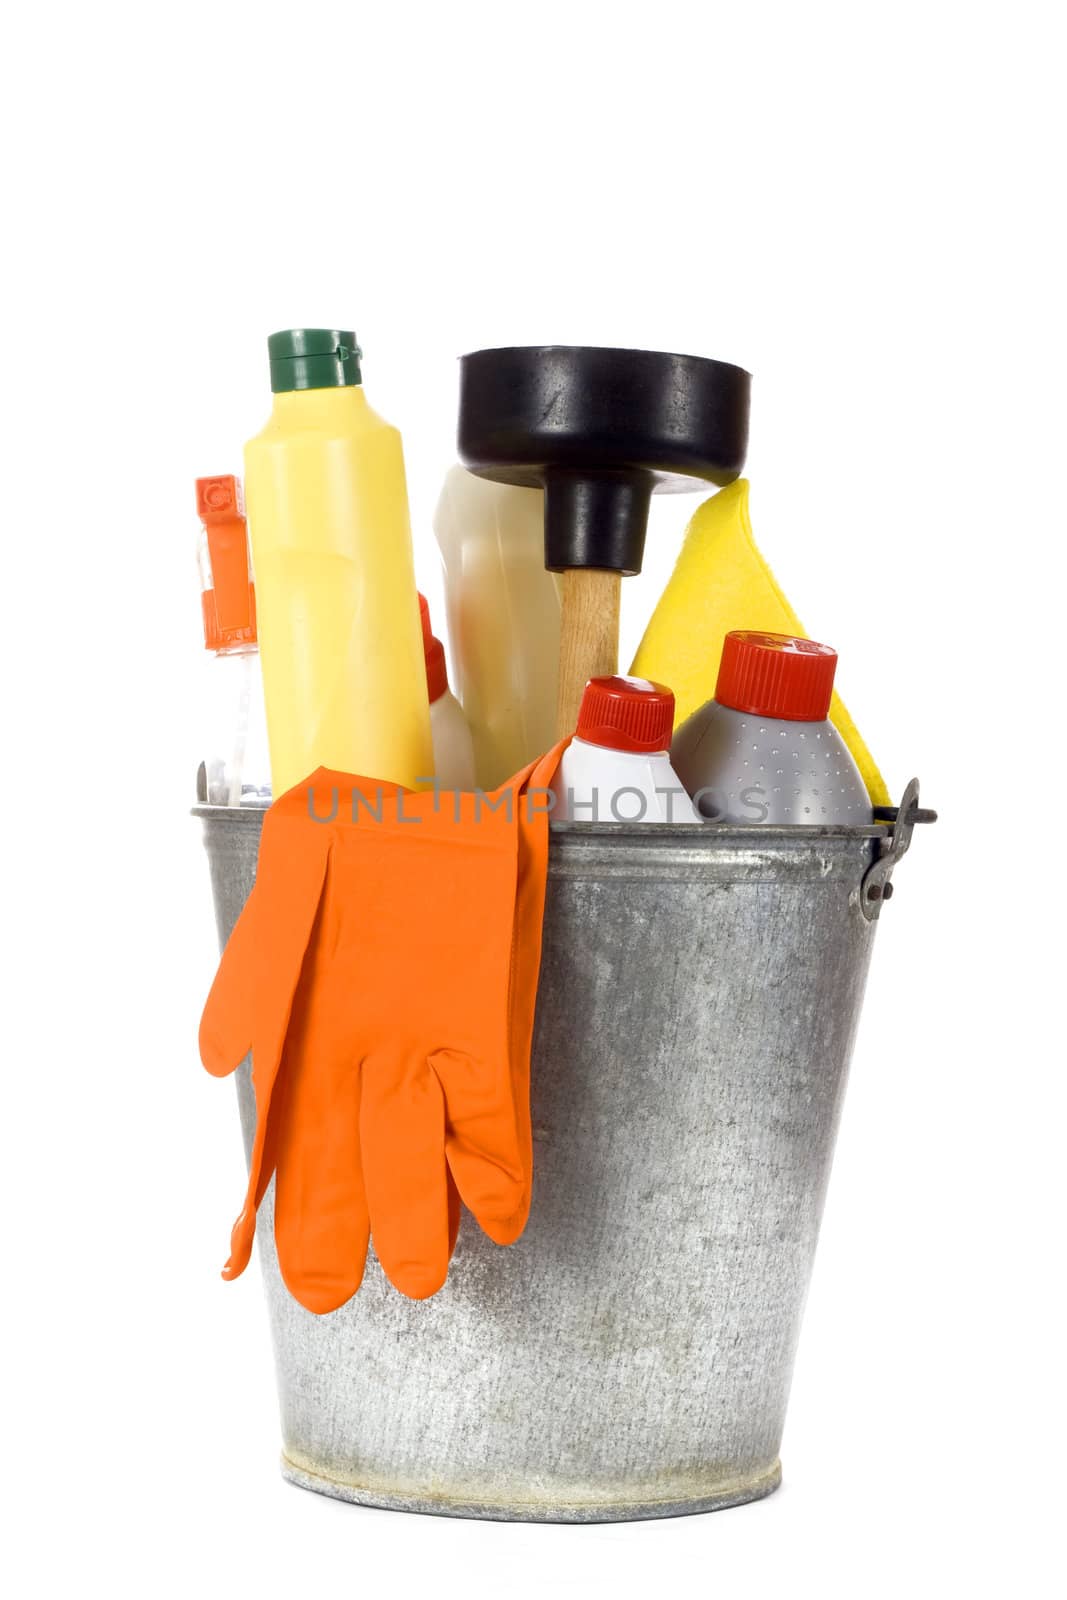 Cleaning Equipment in an iron bucket izoilrovannye on a white background
